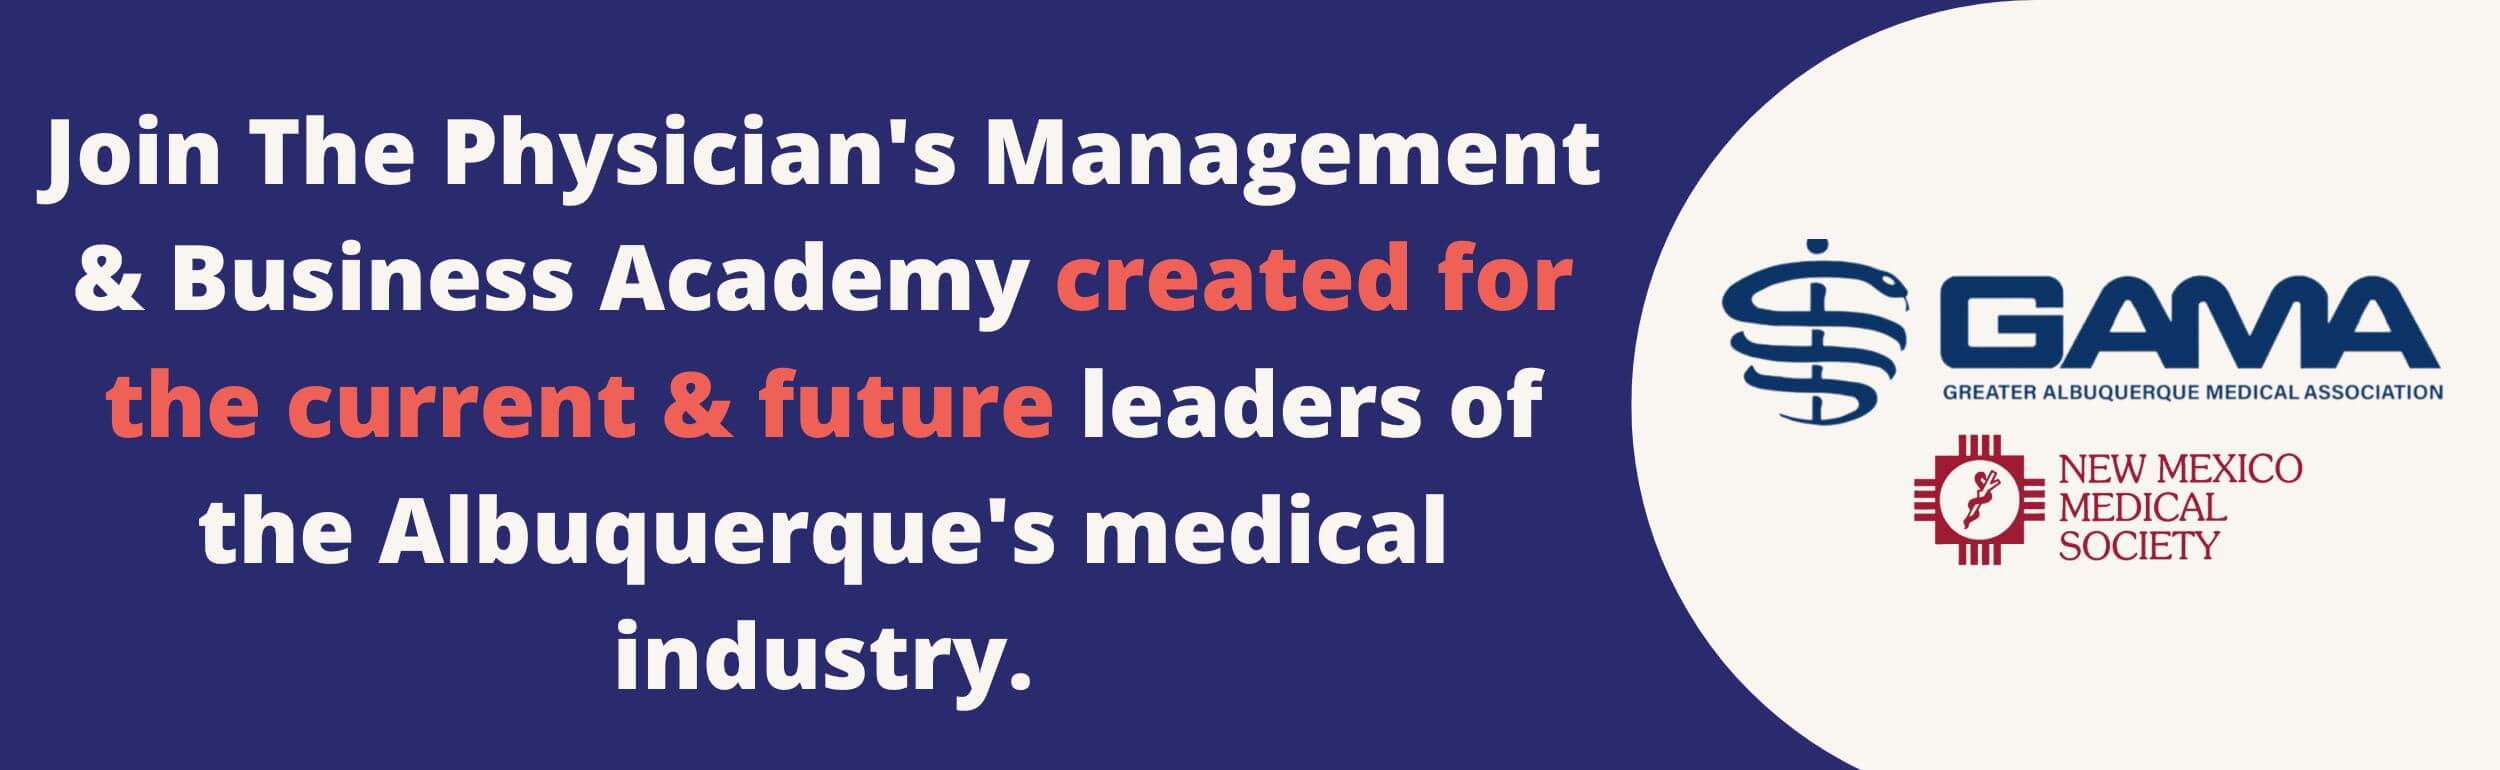 _The Physician's Management &amp; Business Academy Newsletter Banners - Editable Templates (1)